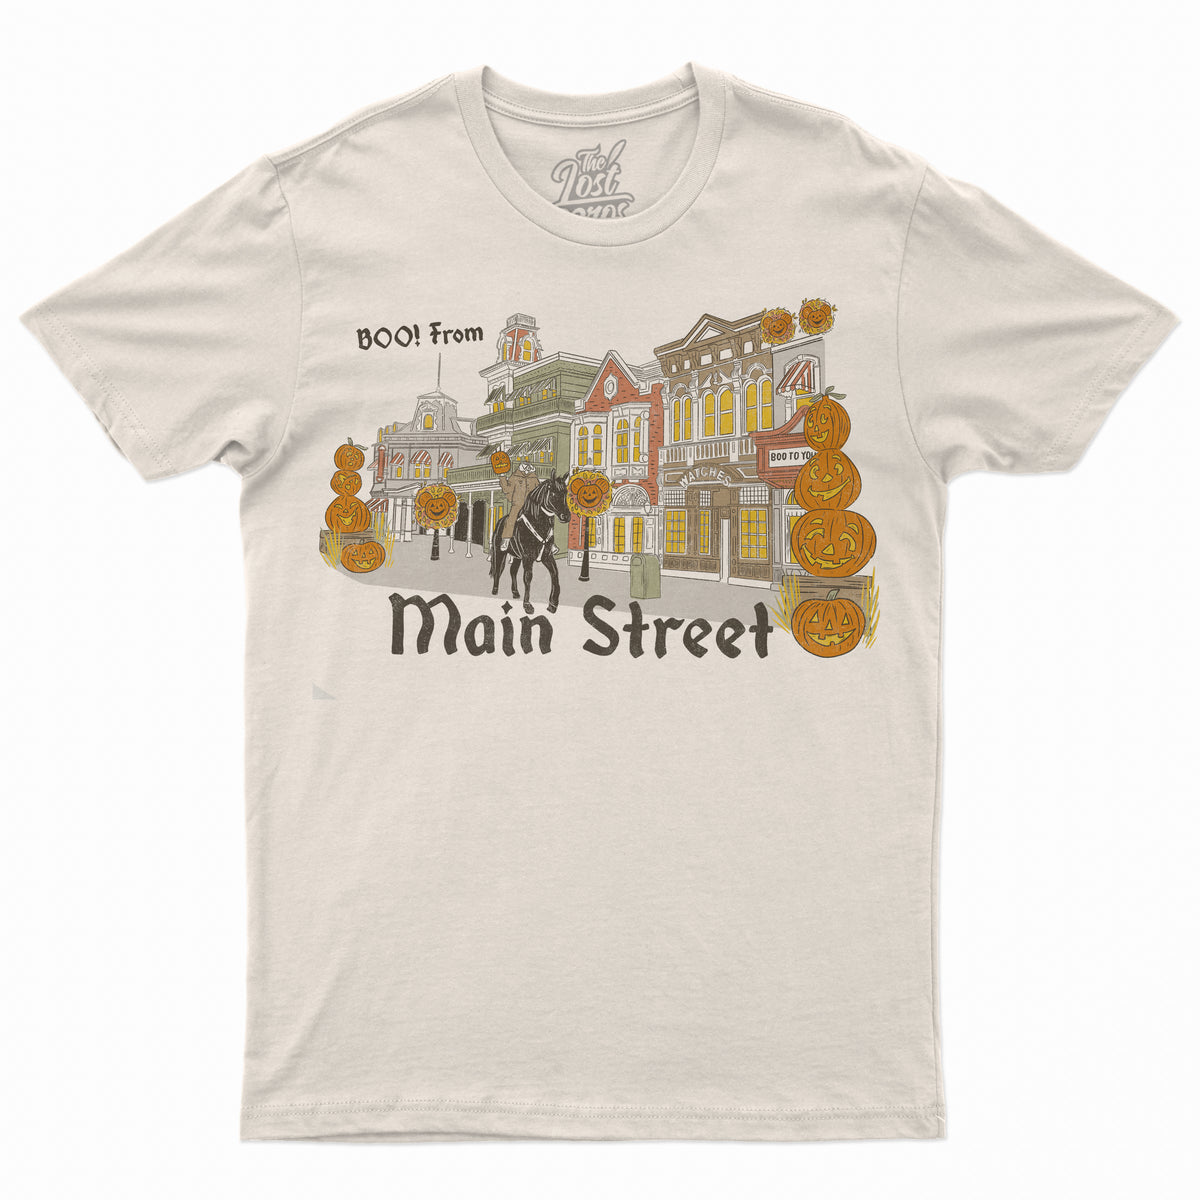 the lost bros Boo! from Main Street Tee